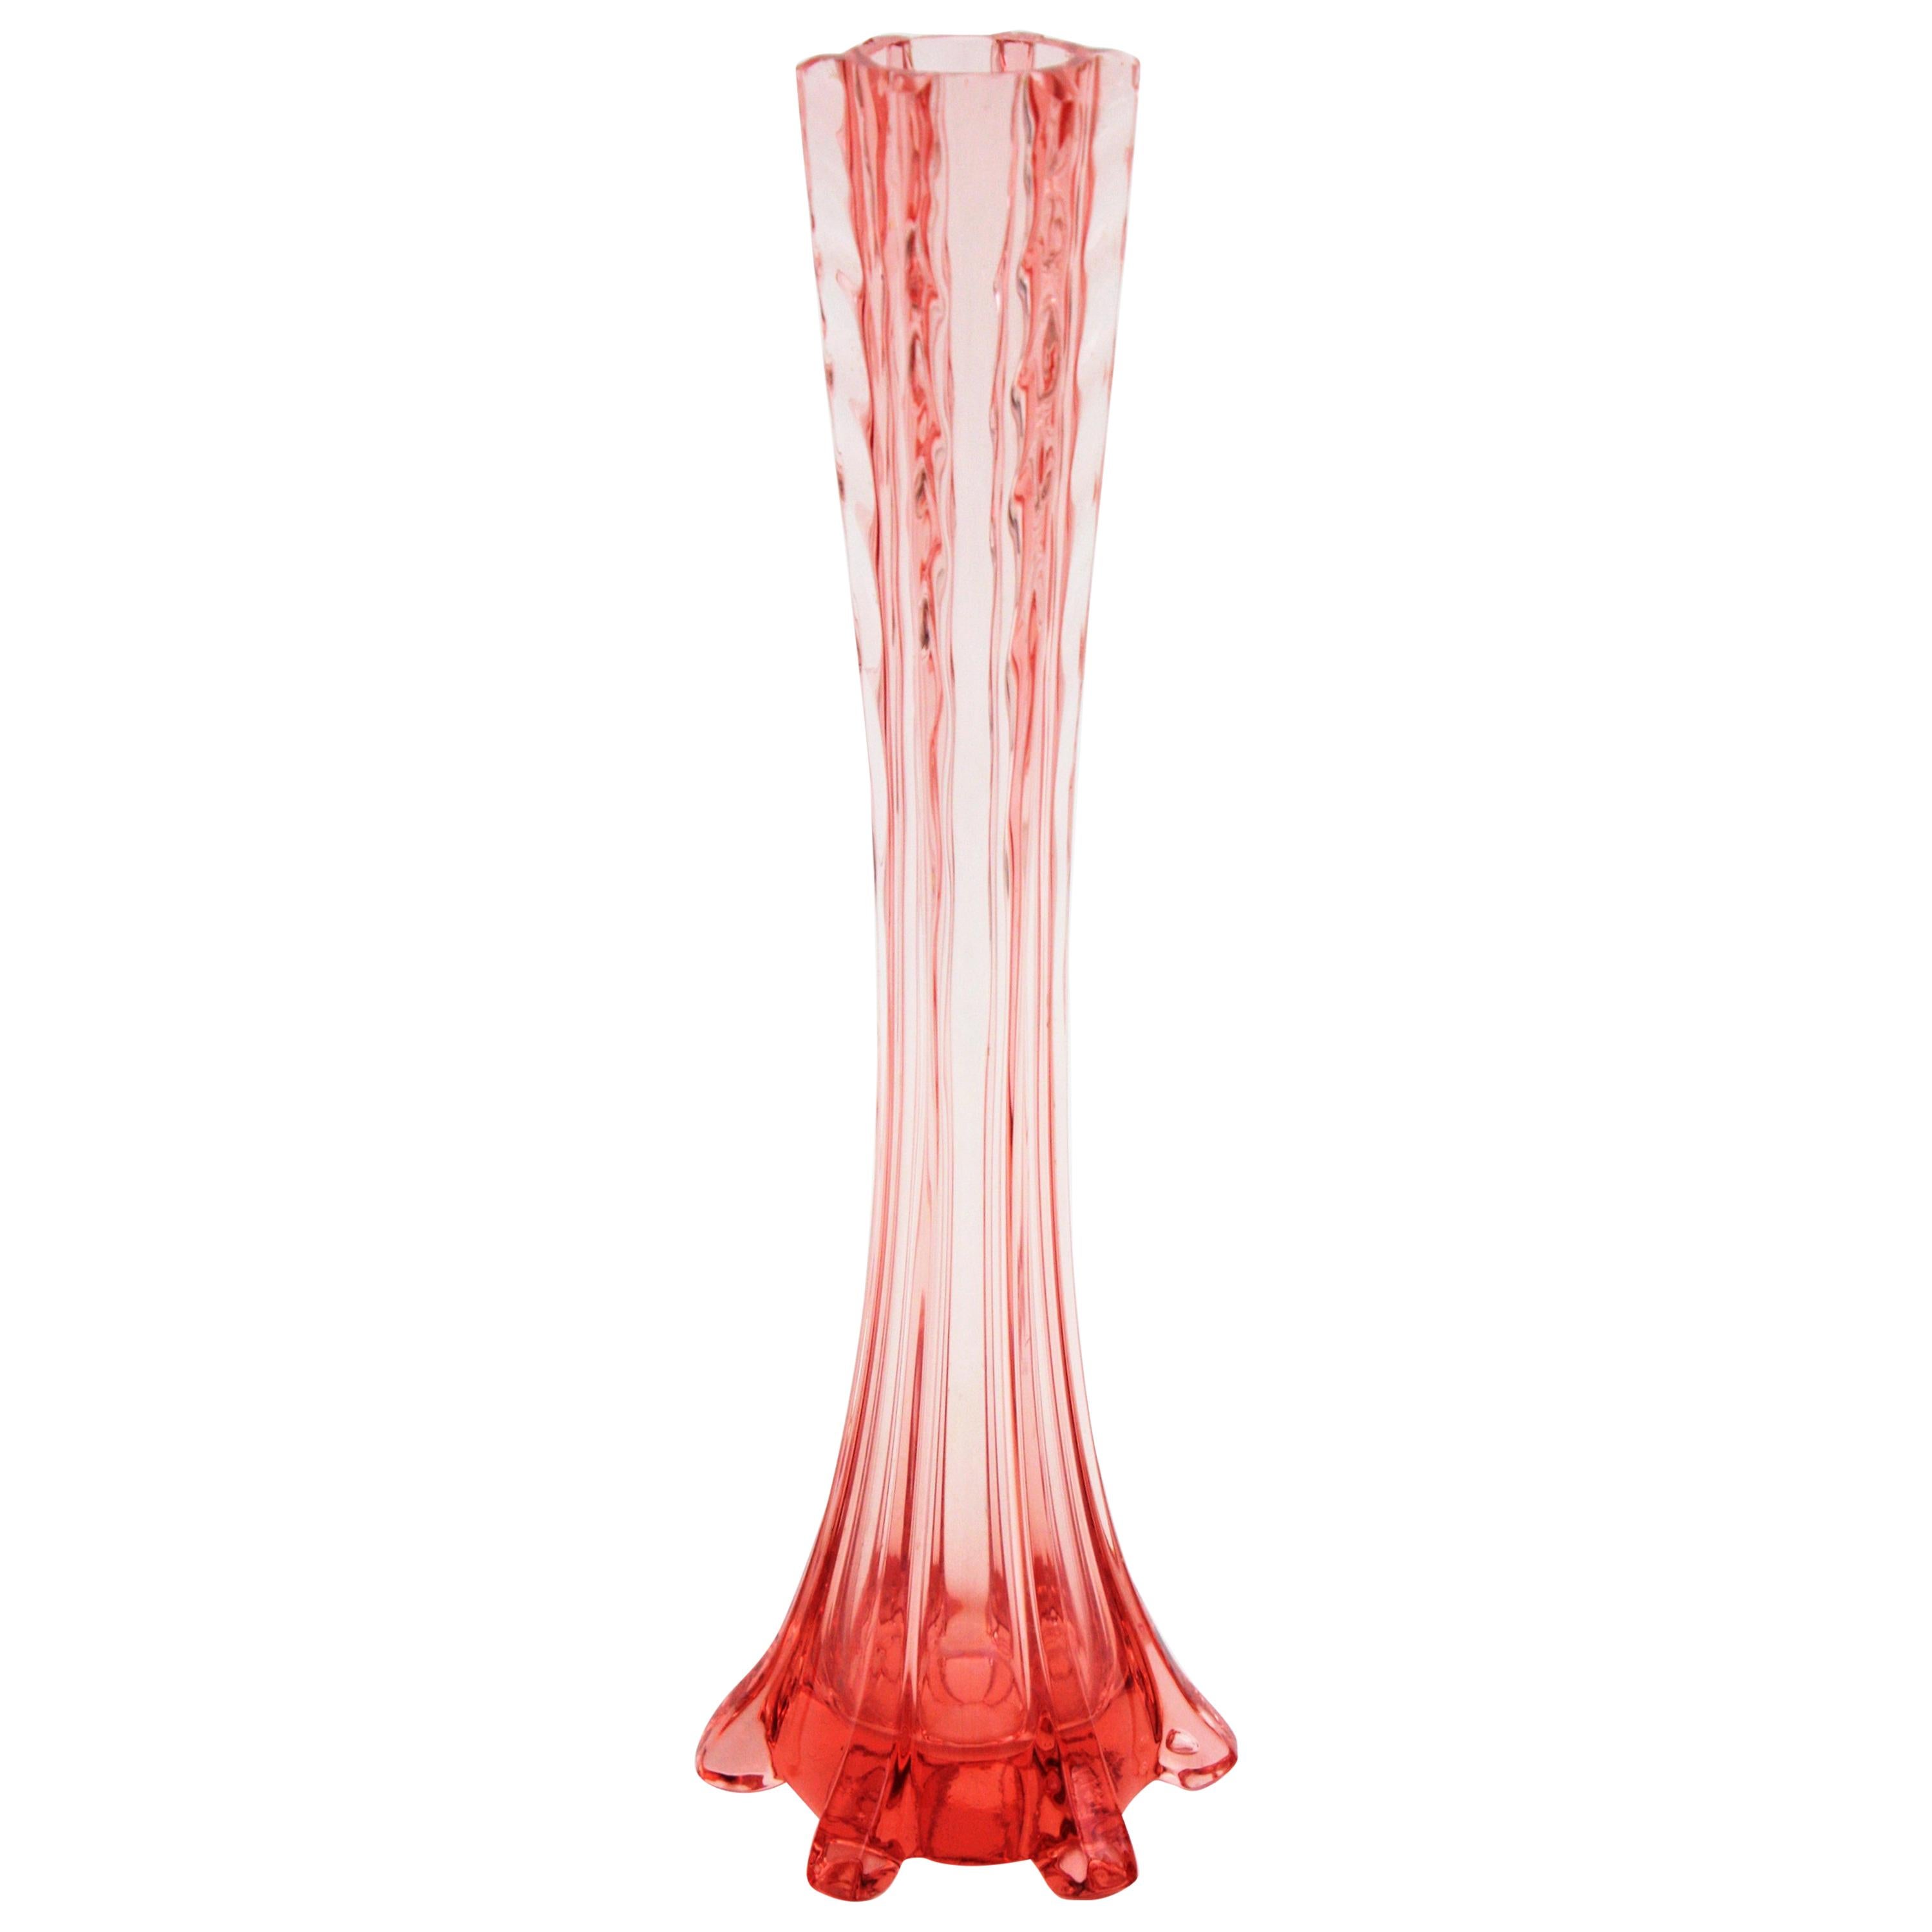 Stylish Baccarat style one-flower vase in amber-rose blown glass vase, France, 1930s.
This long neck single flower vase has applied glass details on its sides and swirls decorating the neck. Beautiful to be placed alone or as a part of a